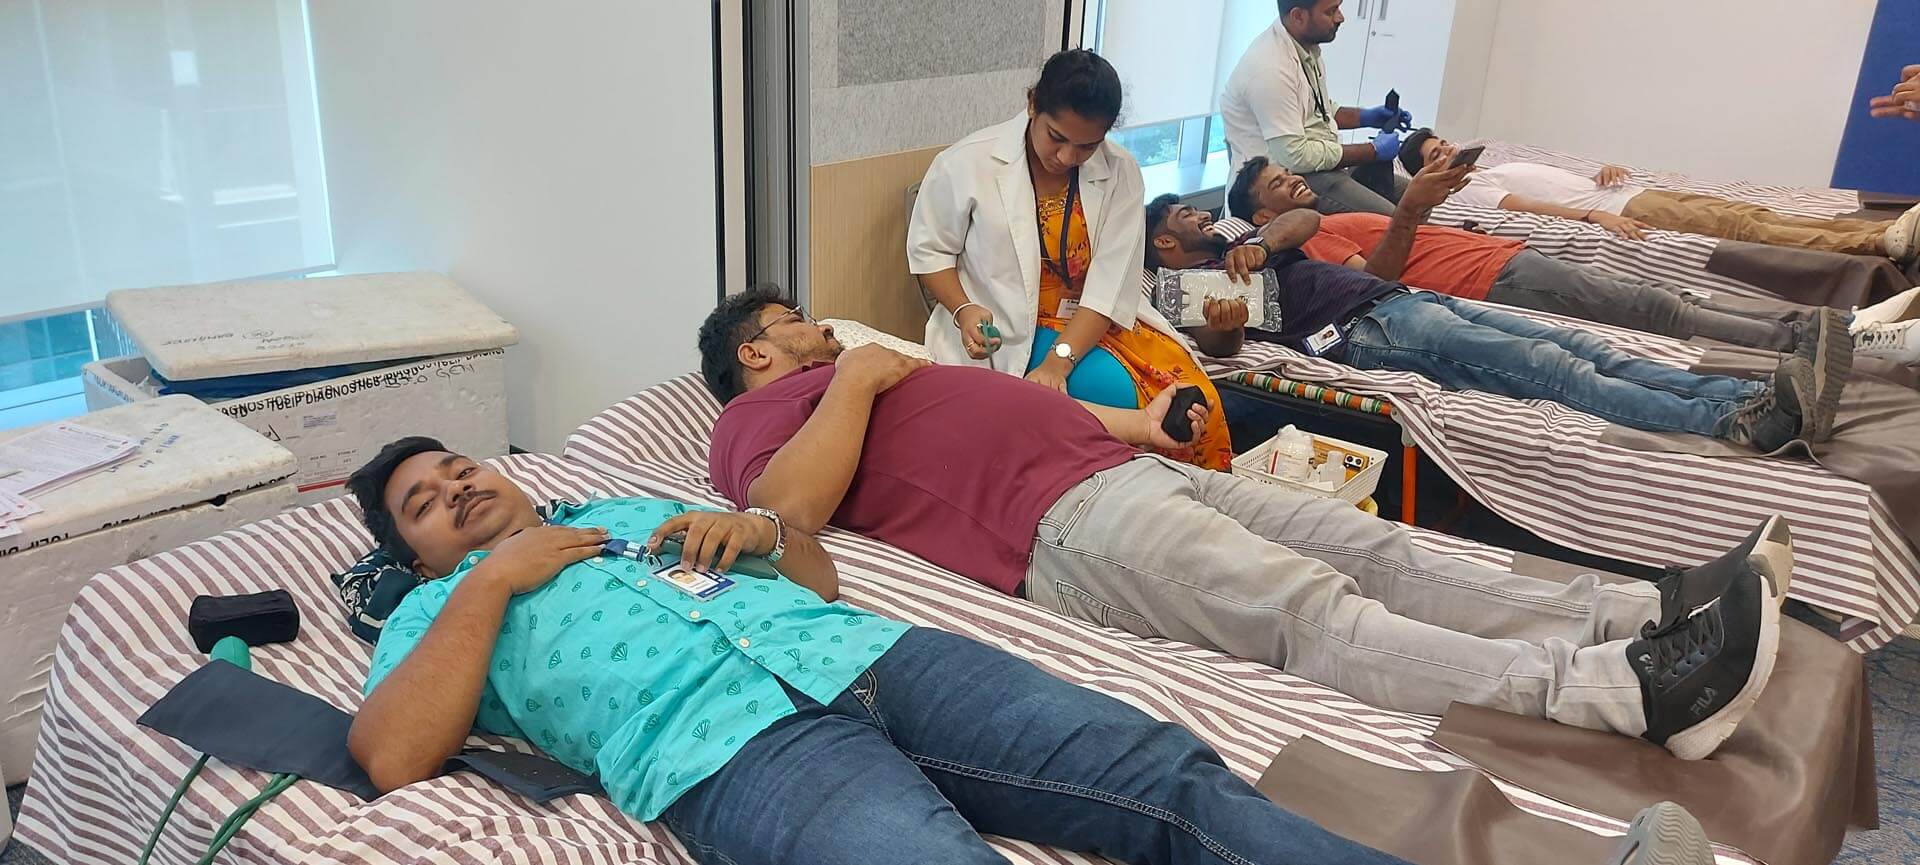 a group of people lying on beds donating blood